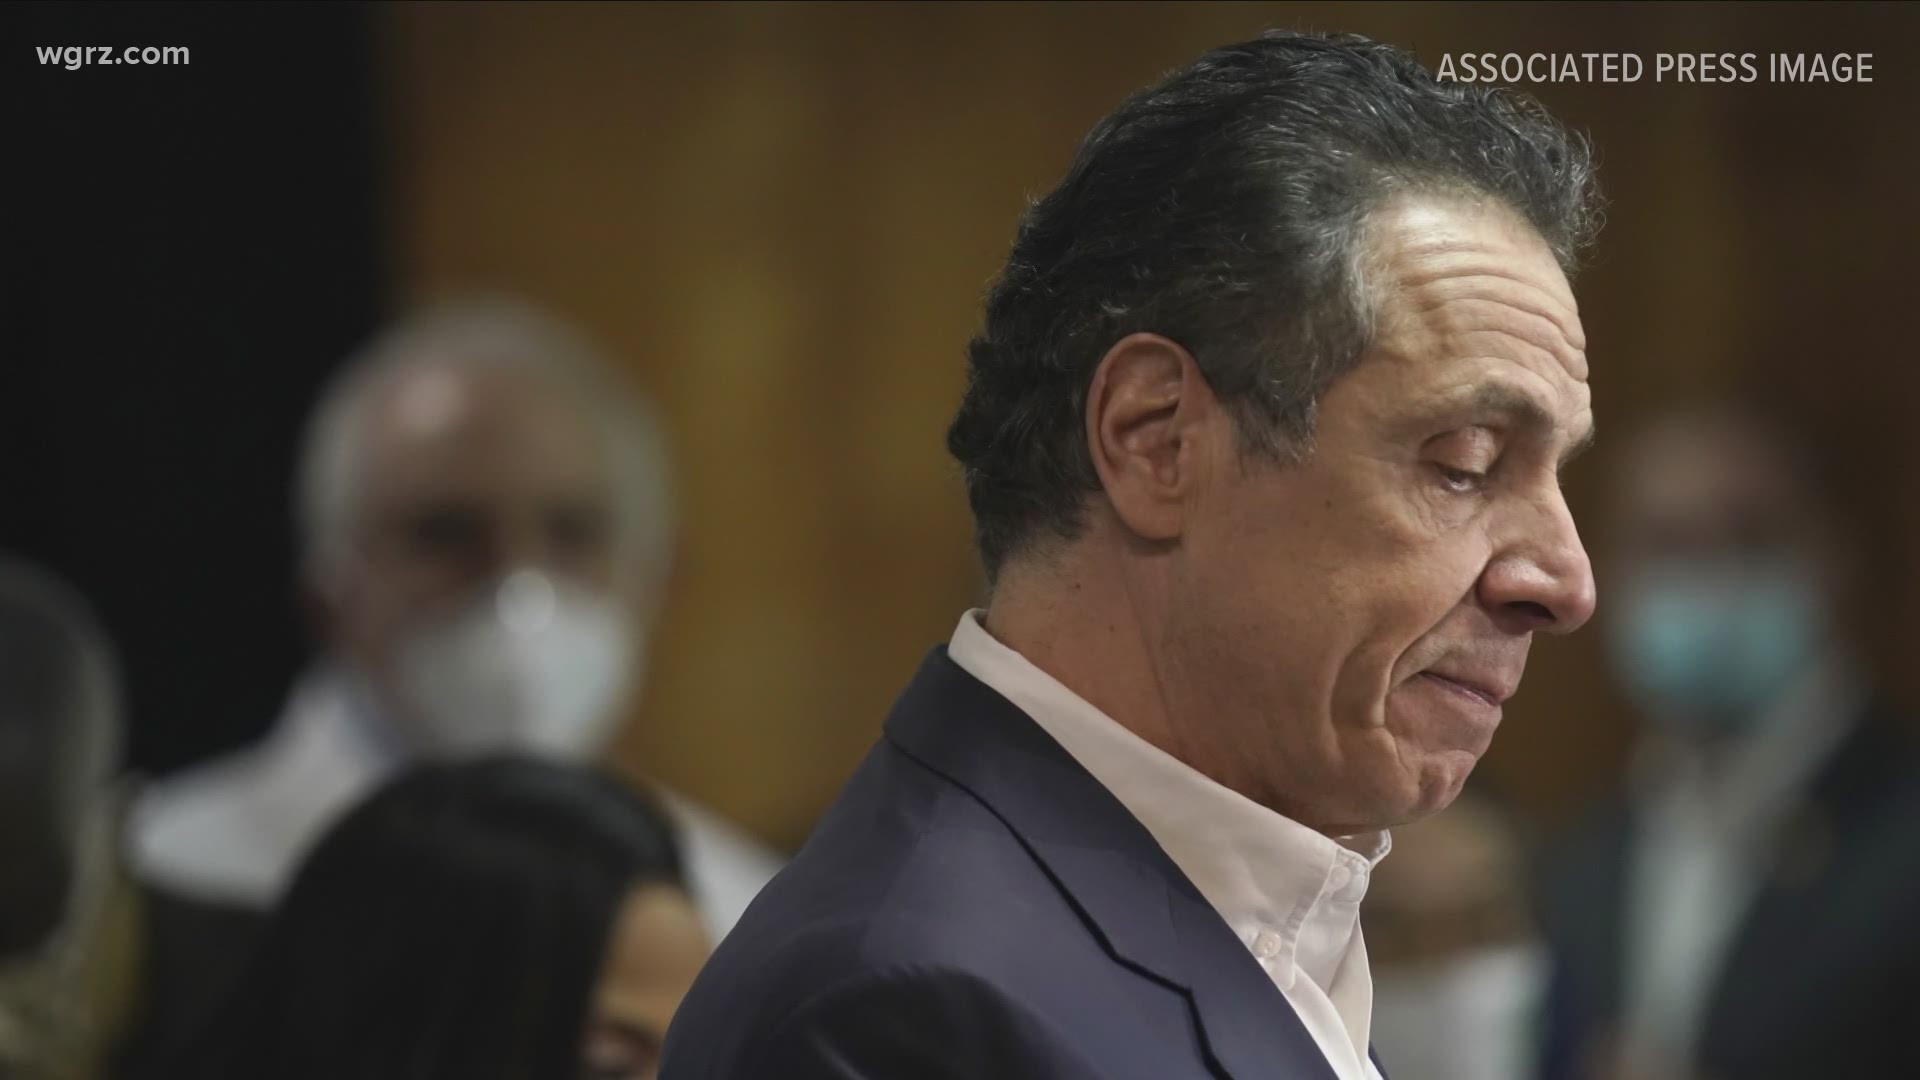 It's been four months since the state attorney general's office launched a probe into sexual harassment and misconduct allegations against Governor Andrew Cuomo.